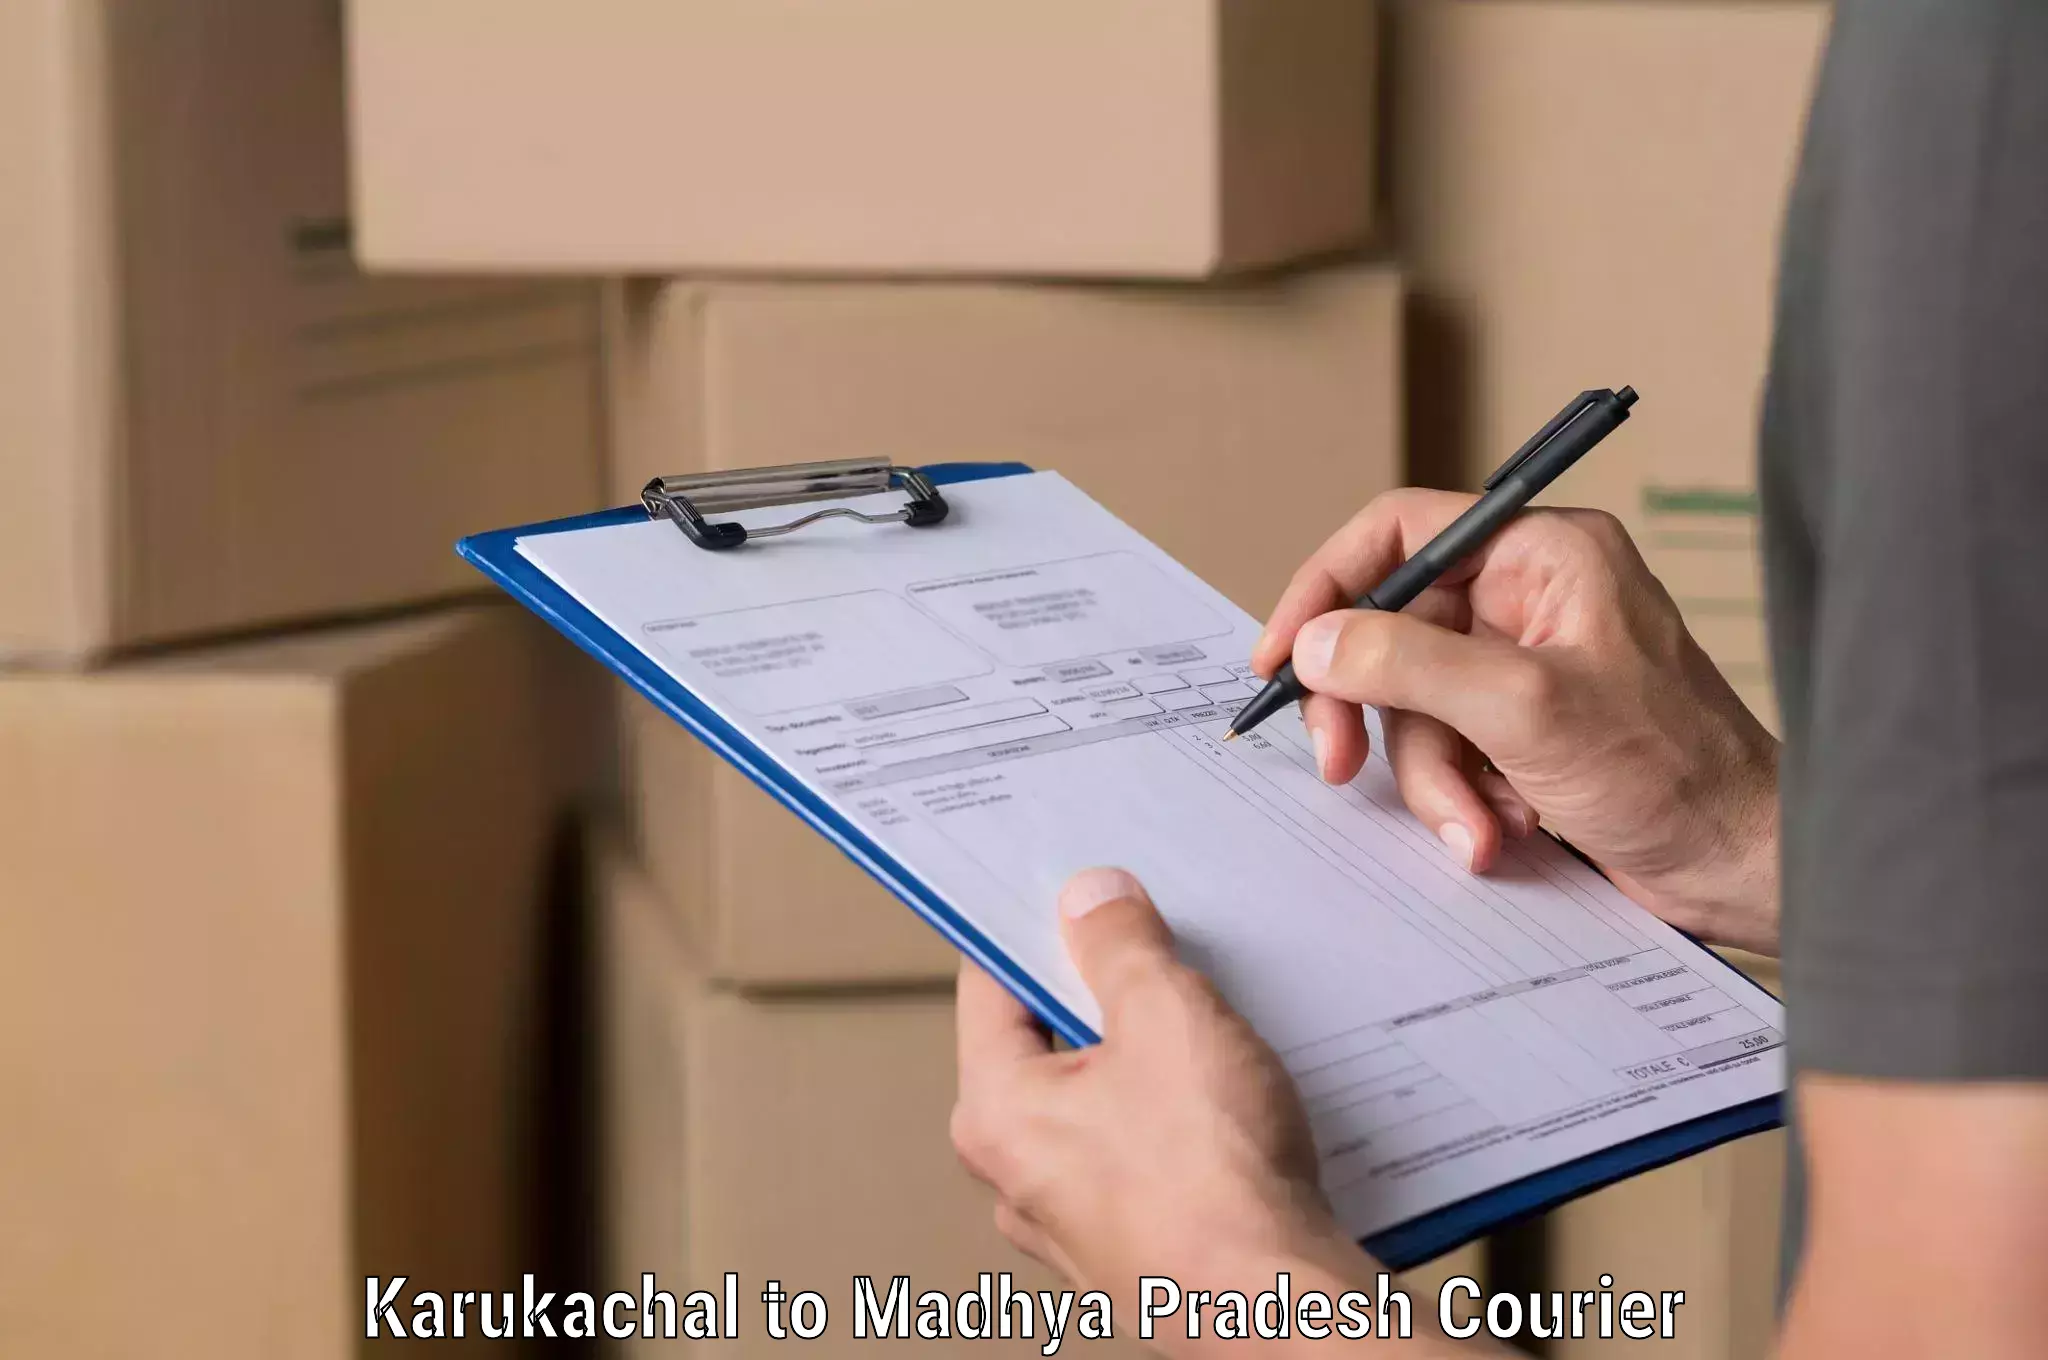 Reliable courier service Karukachal to Ratlam